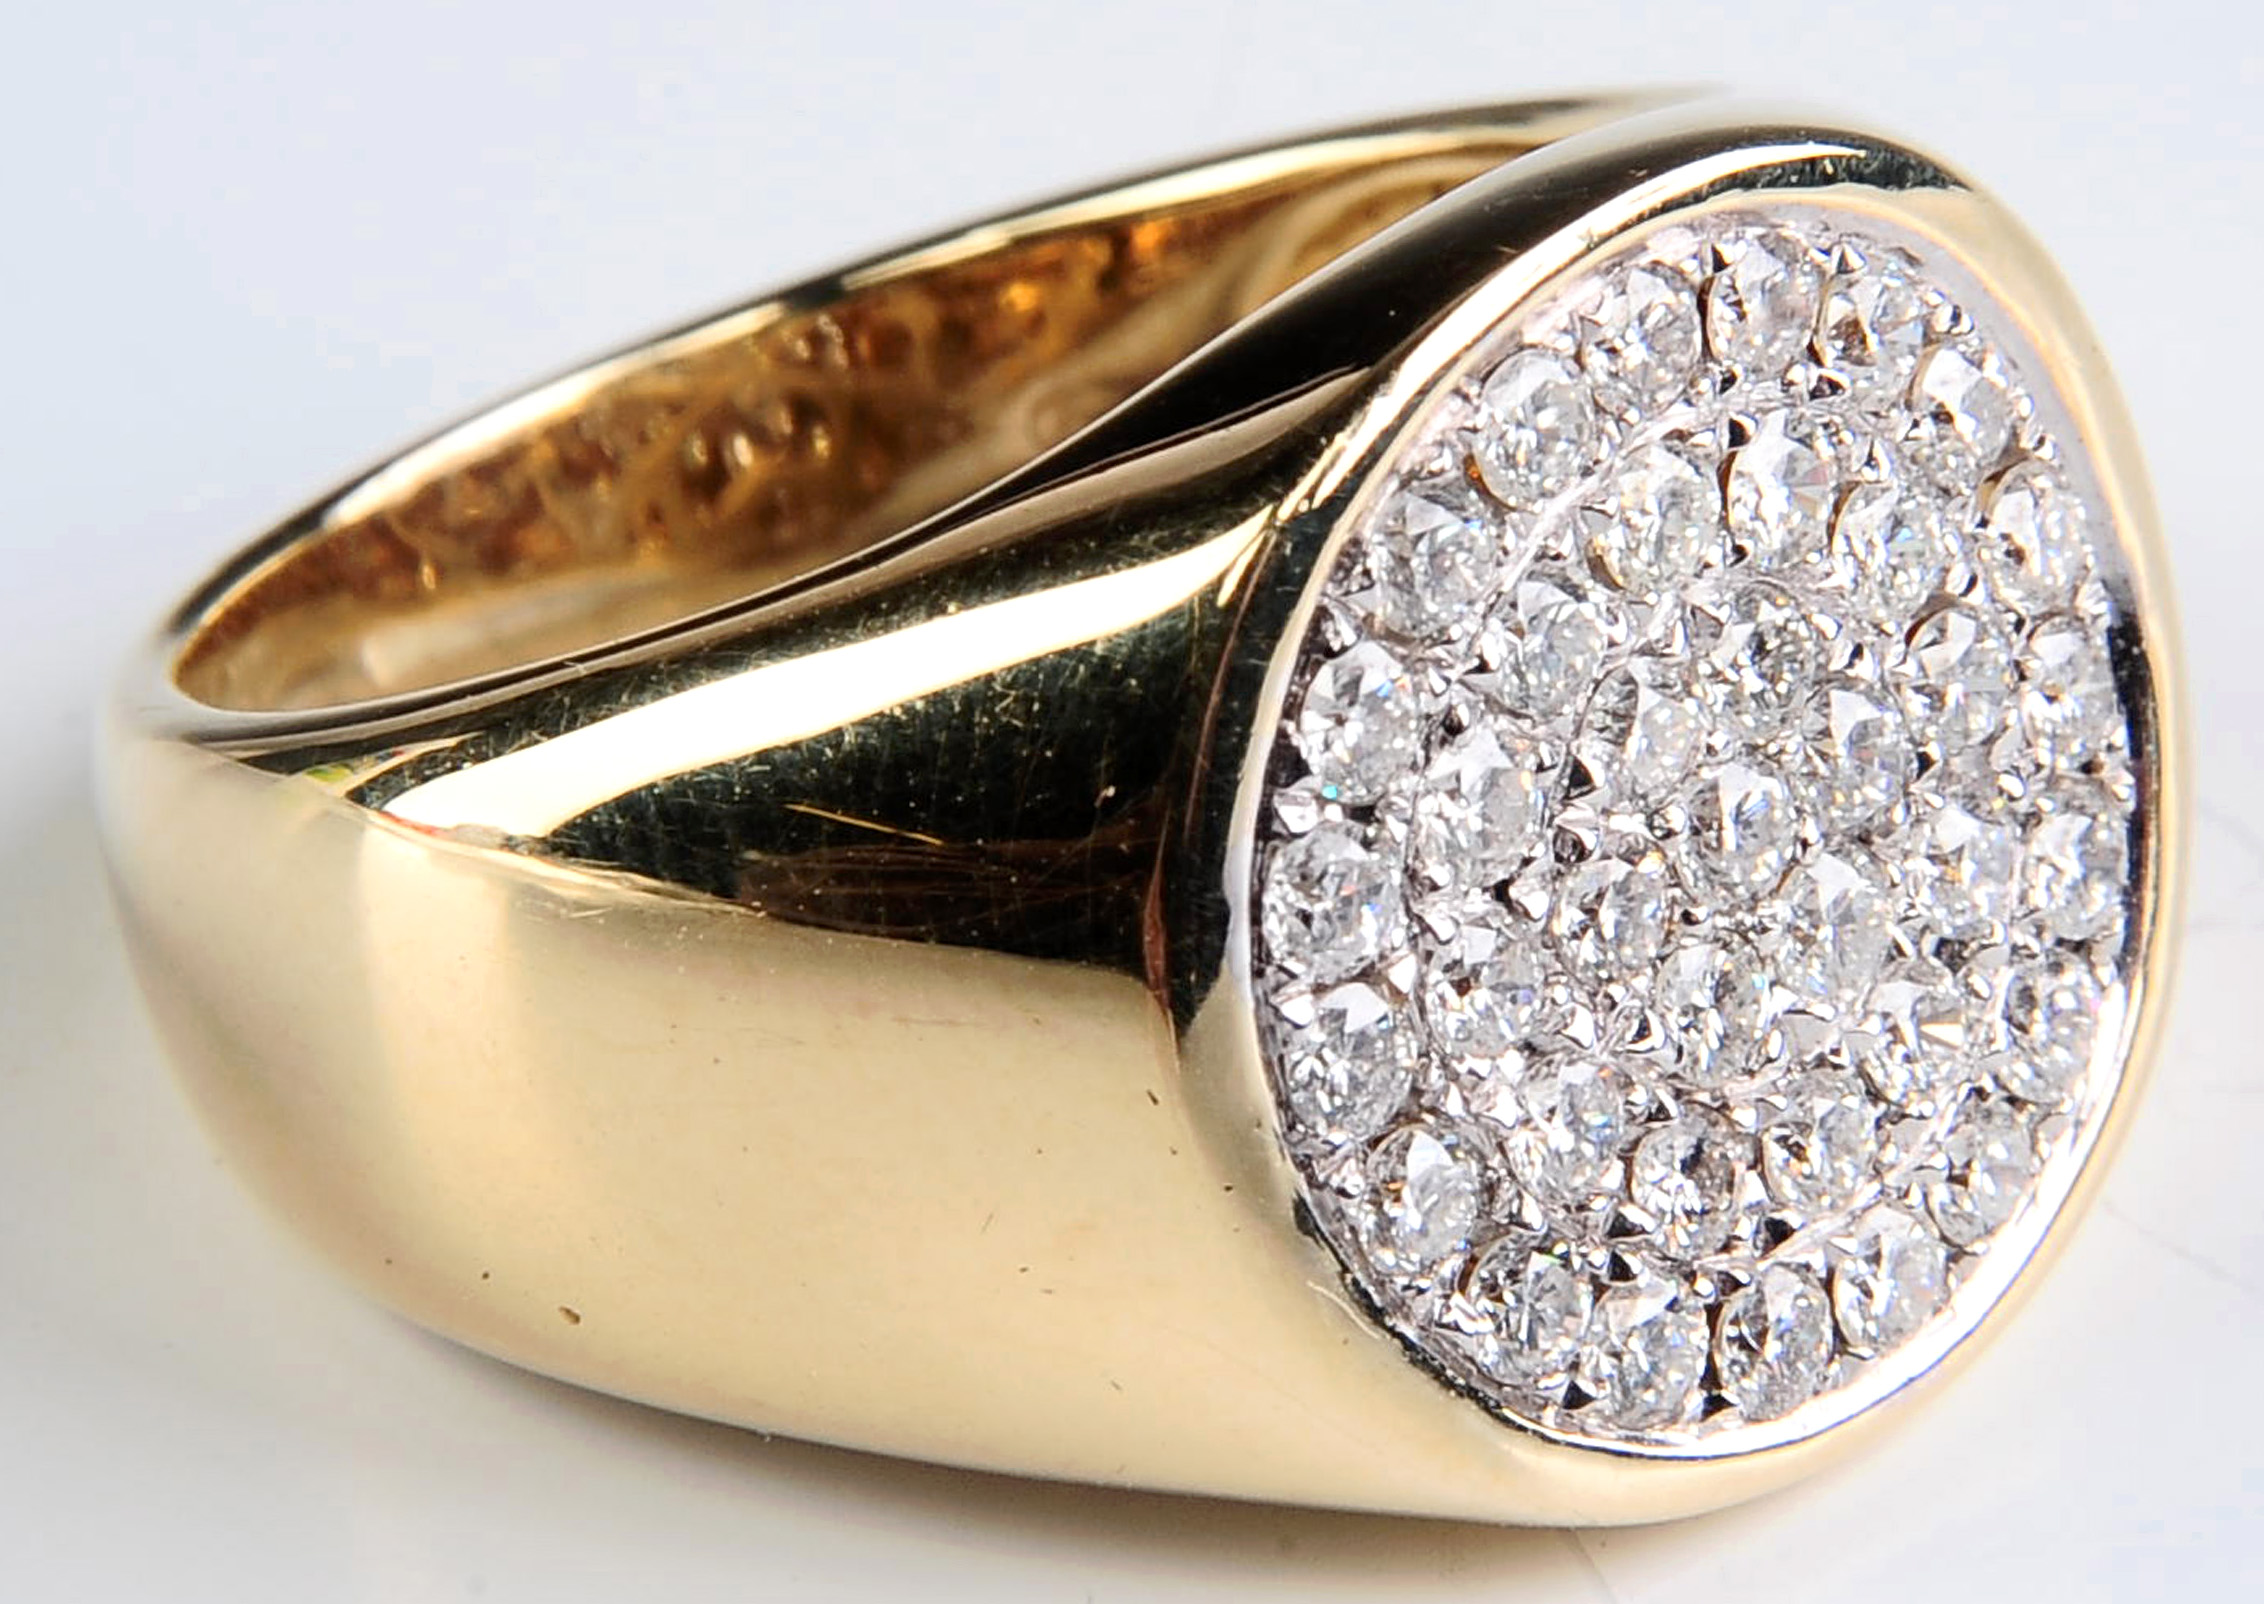 A GENT'S 14K PAVE DIAMOND RING APPROX 1 CARAT TW